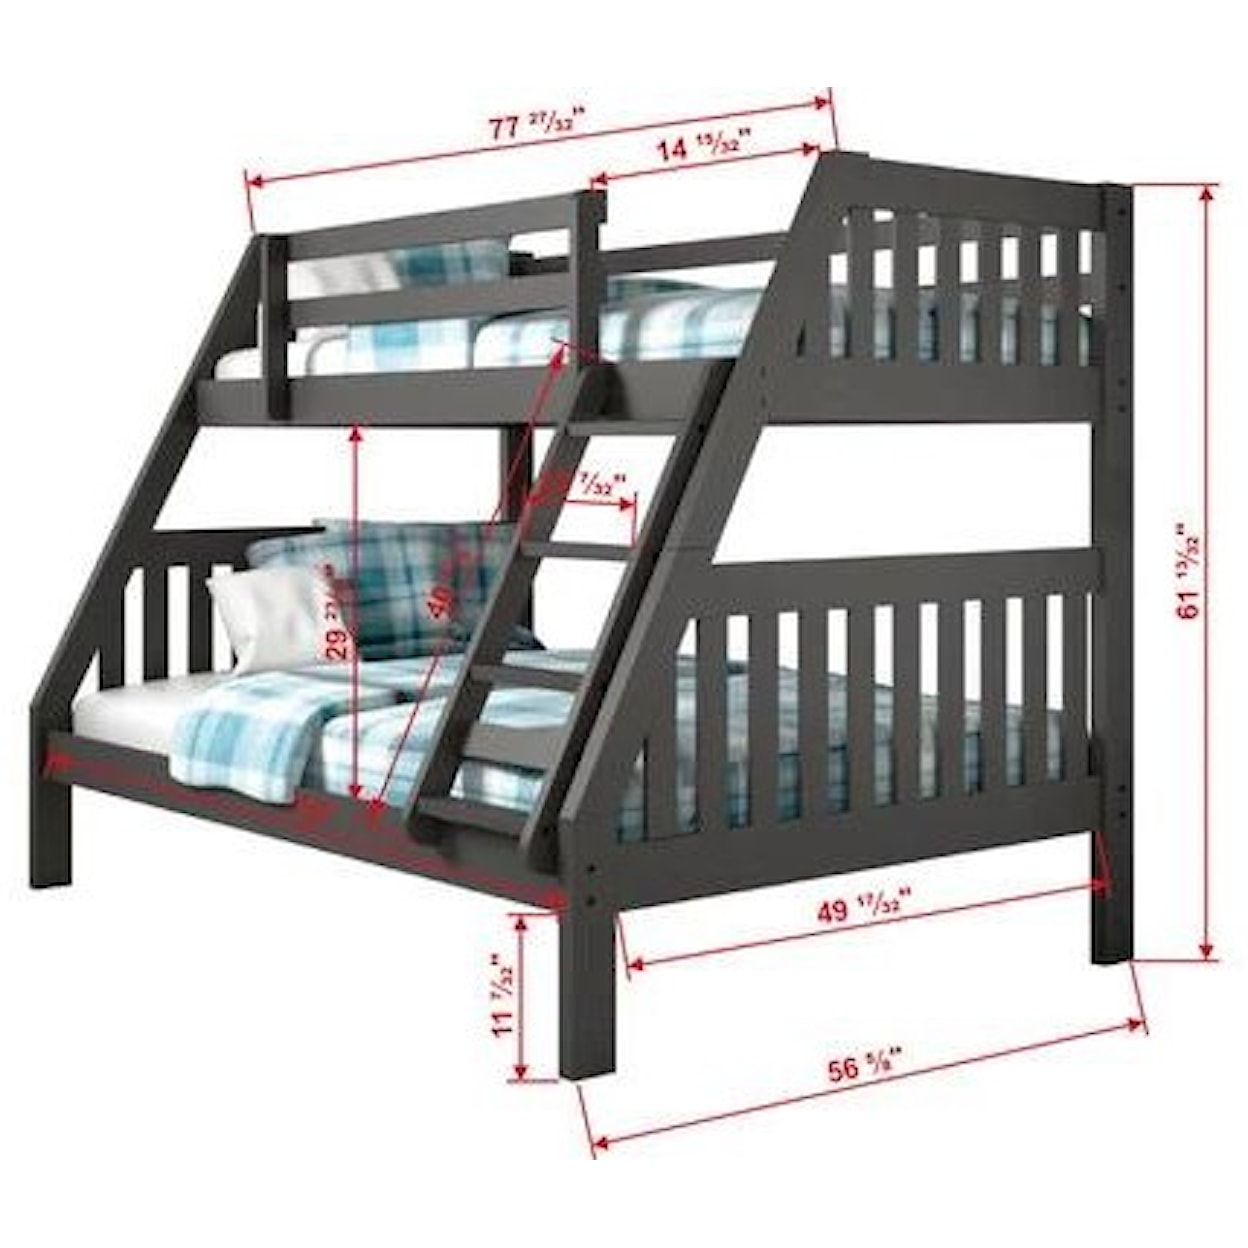 Canal House Bunk Beds Twin-Over-Full Bunk Bed with Drawers